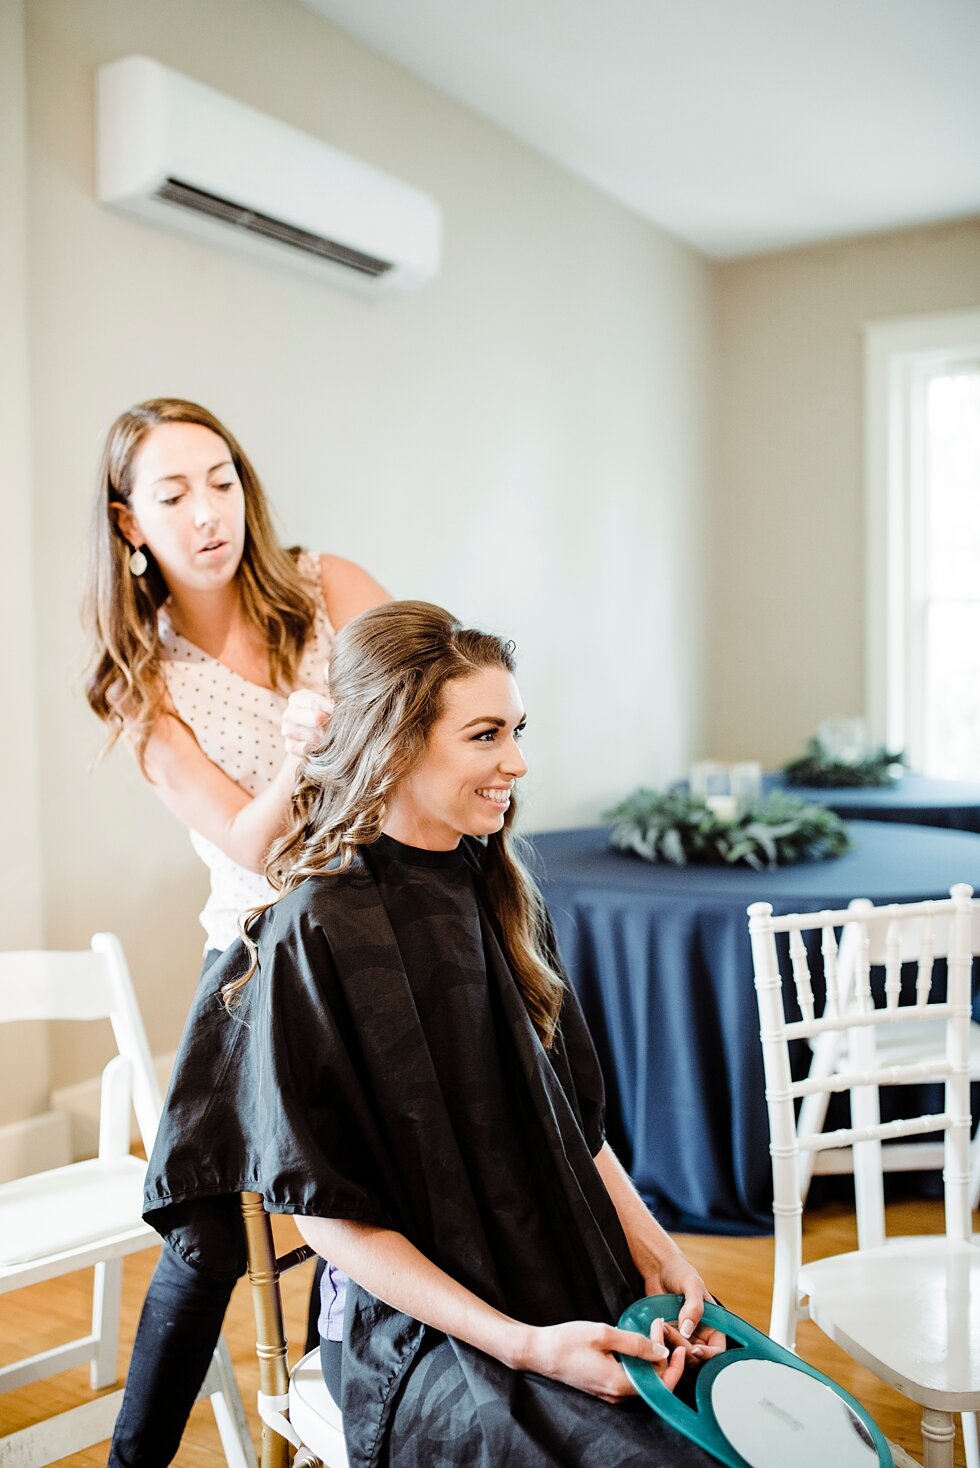  Bride sitting while hair is being done as she prepares to get married and walk down the aisle with the love of her life. wedding ceremony details stunning photography married midwest louisville kentucky #weddingphoto #love #justmarried #midwestphoto